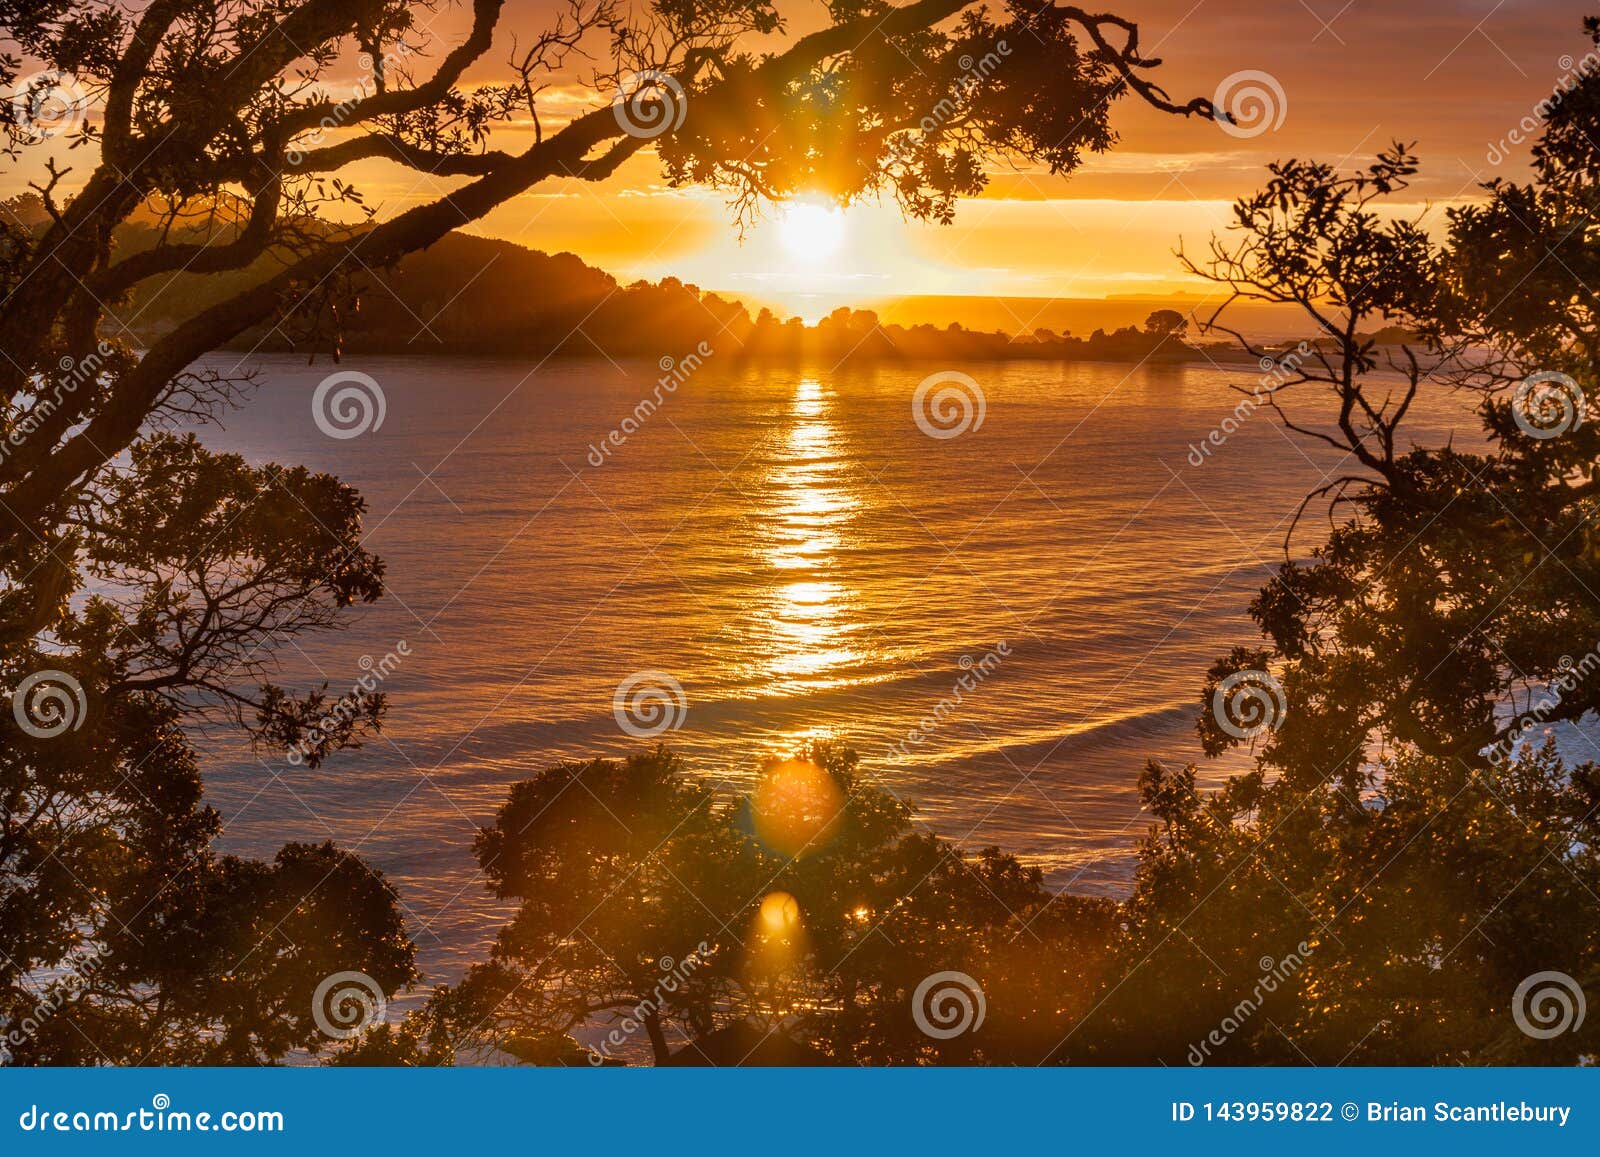 Sunrise Photograph Framed by Branches and Leaves Stock Photo - Image of